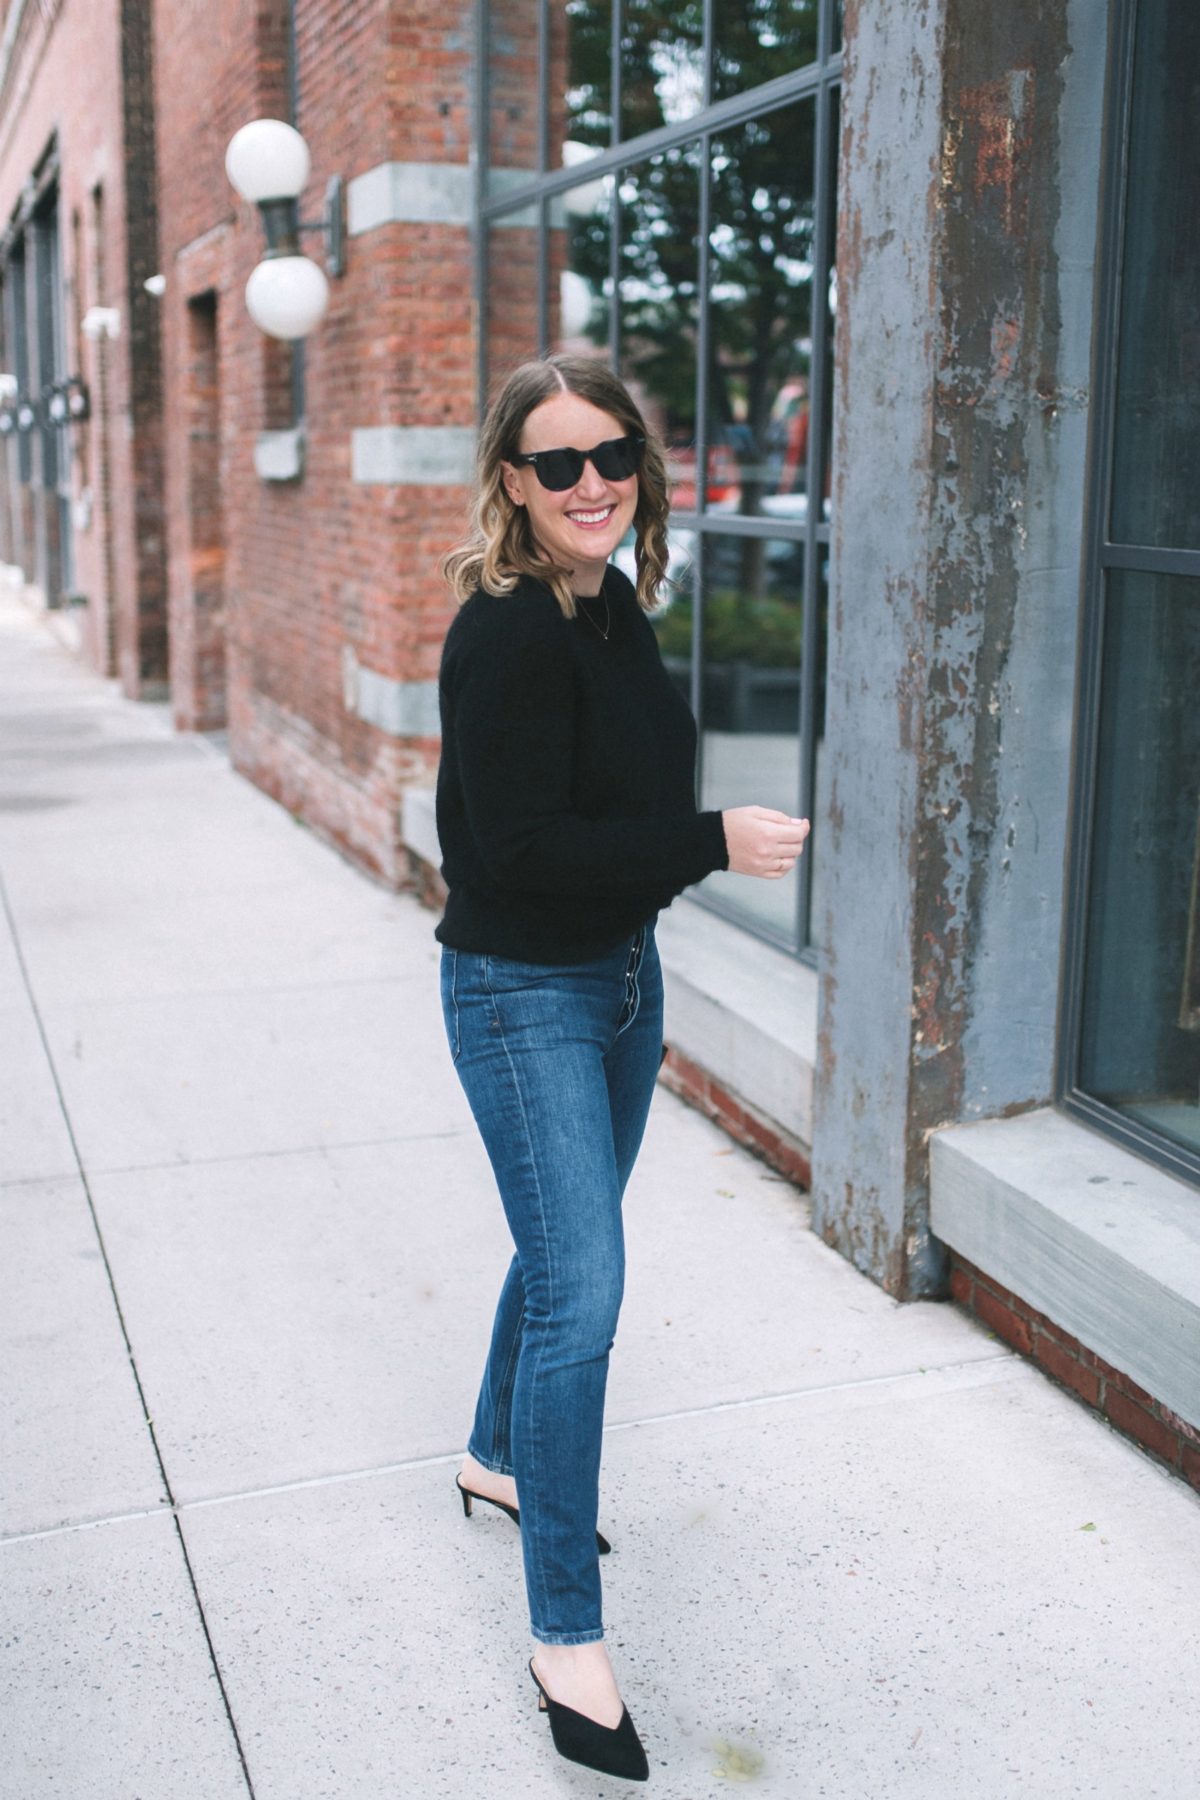 Trench Coat Weather + An Everlane Cashmere Sale - wit & whimsy